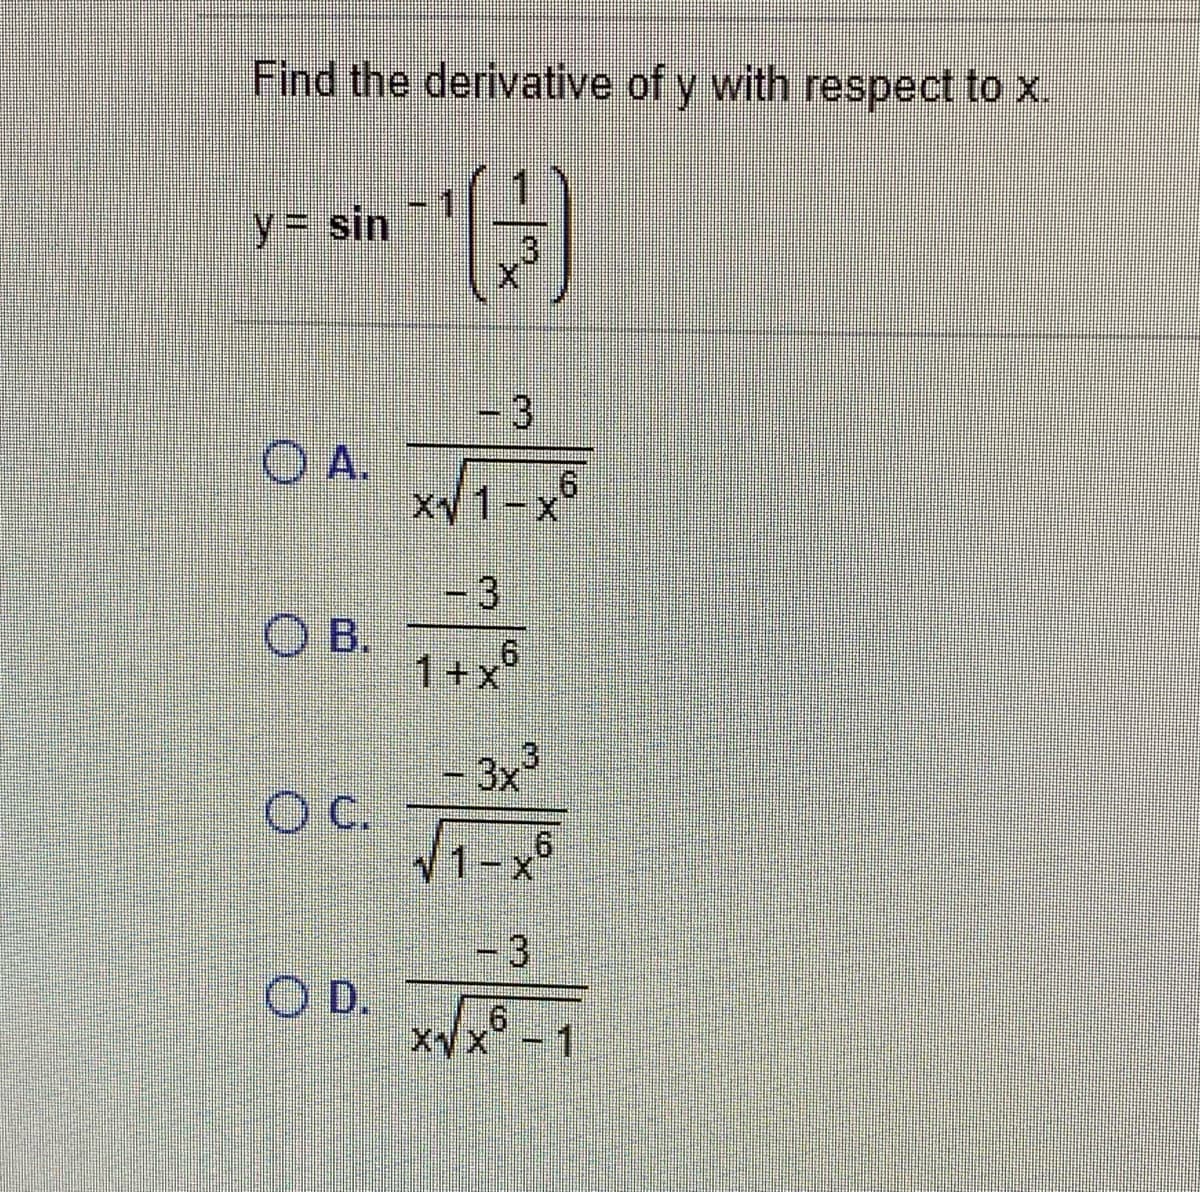 Find the derivative of y with respect to x.
y= sin
3
O A.
Xy 1-x
-3
O B.
1+x°
9)
3x
Oc.
V1-x
-3
O D.
XVx -1
3.
